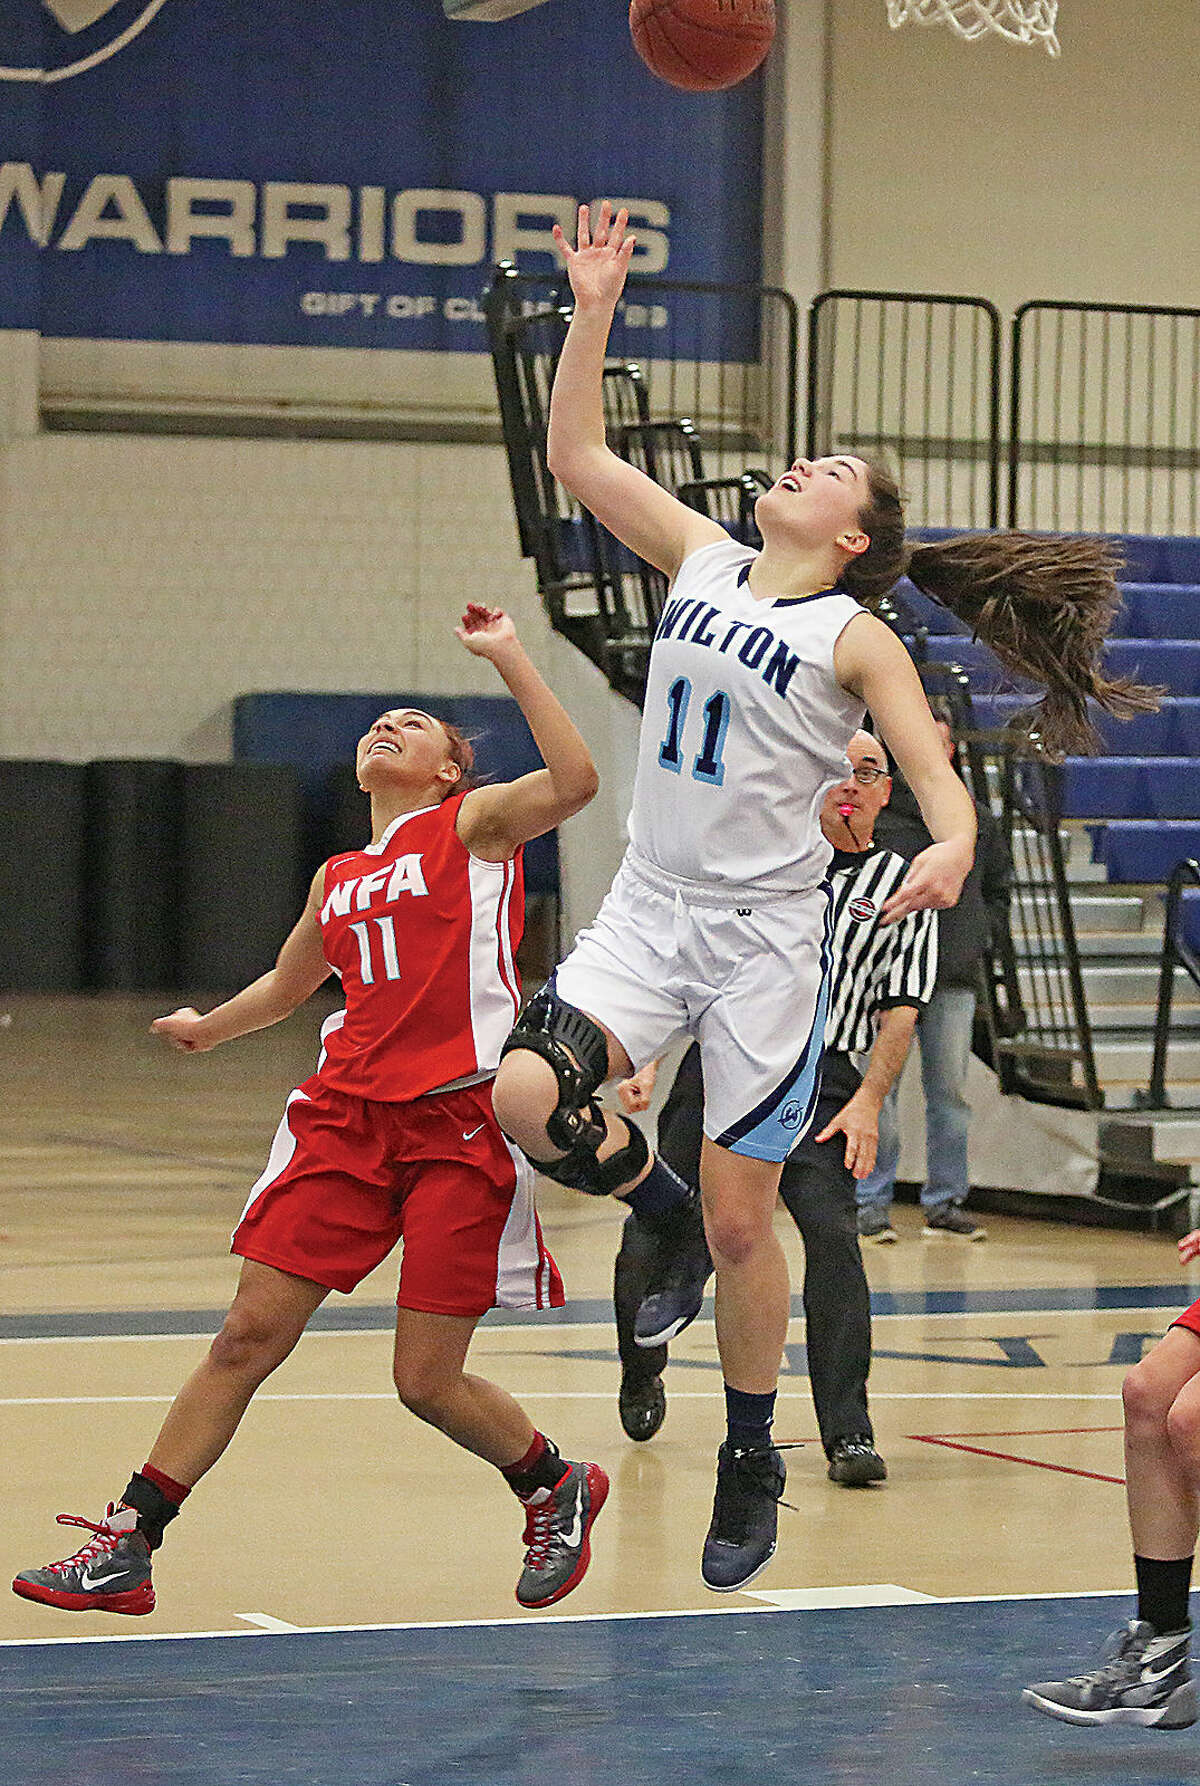 Wilton's #11, Sarah Fitzgerald, takes a shot during a home game against Norwich Free Academy Monday evening.